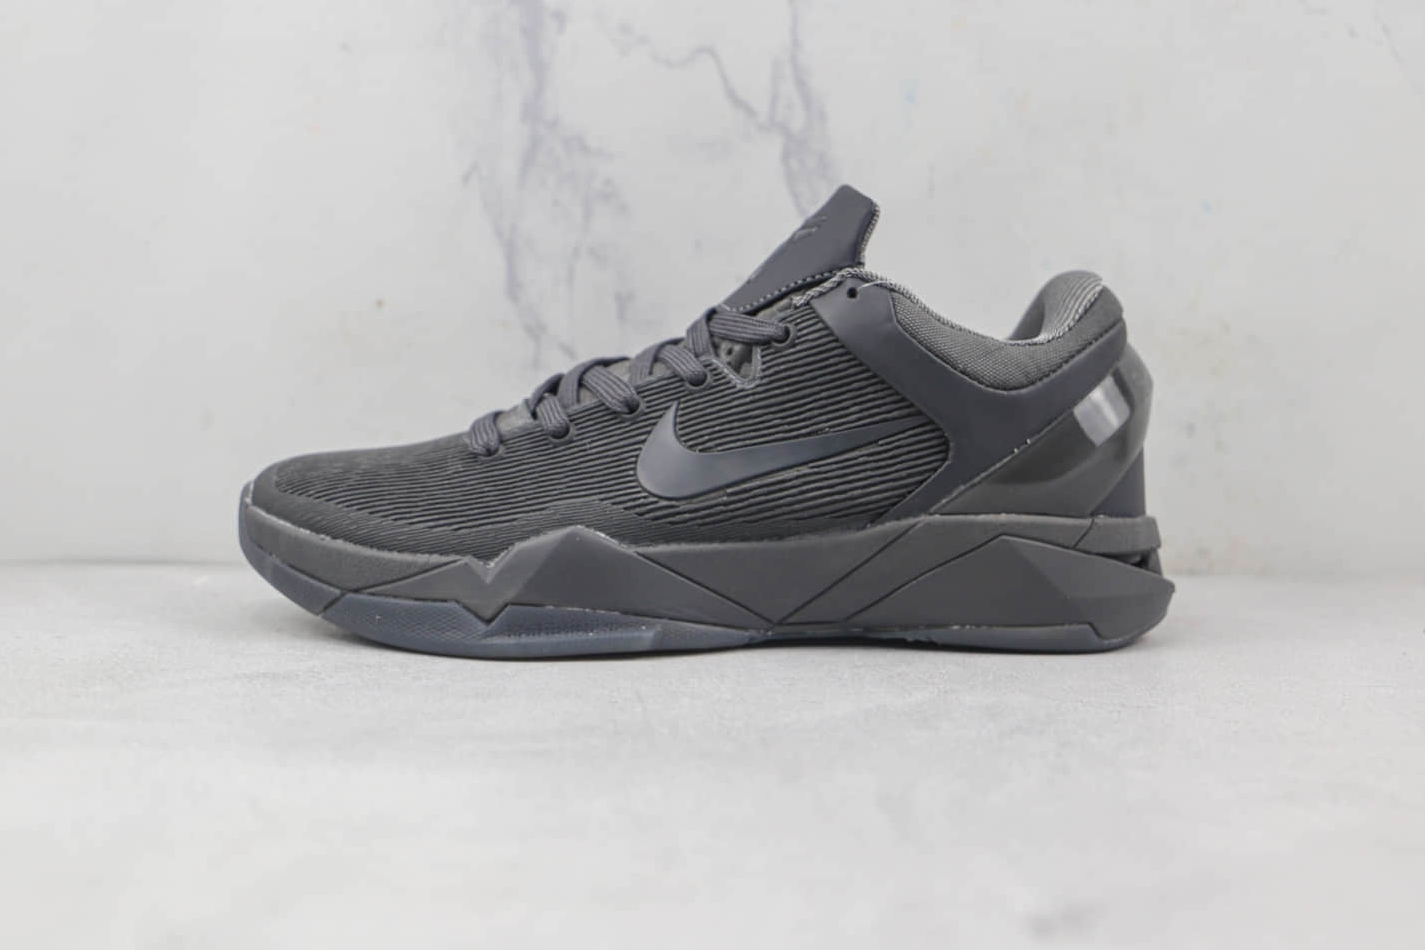 Nike Zoom Kobe 7 'Fade To Black' 869460-442 - Limited Edition Basketball Sneakers